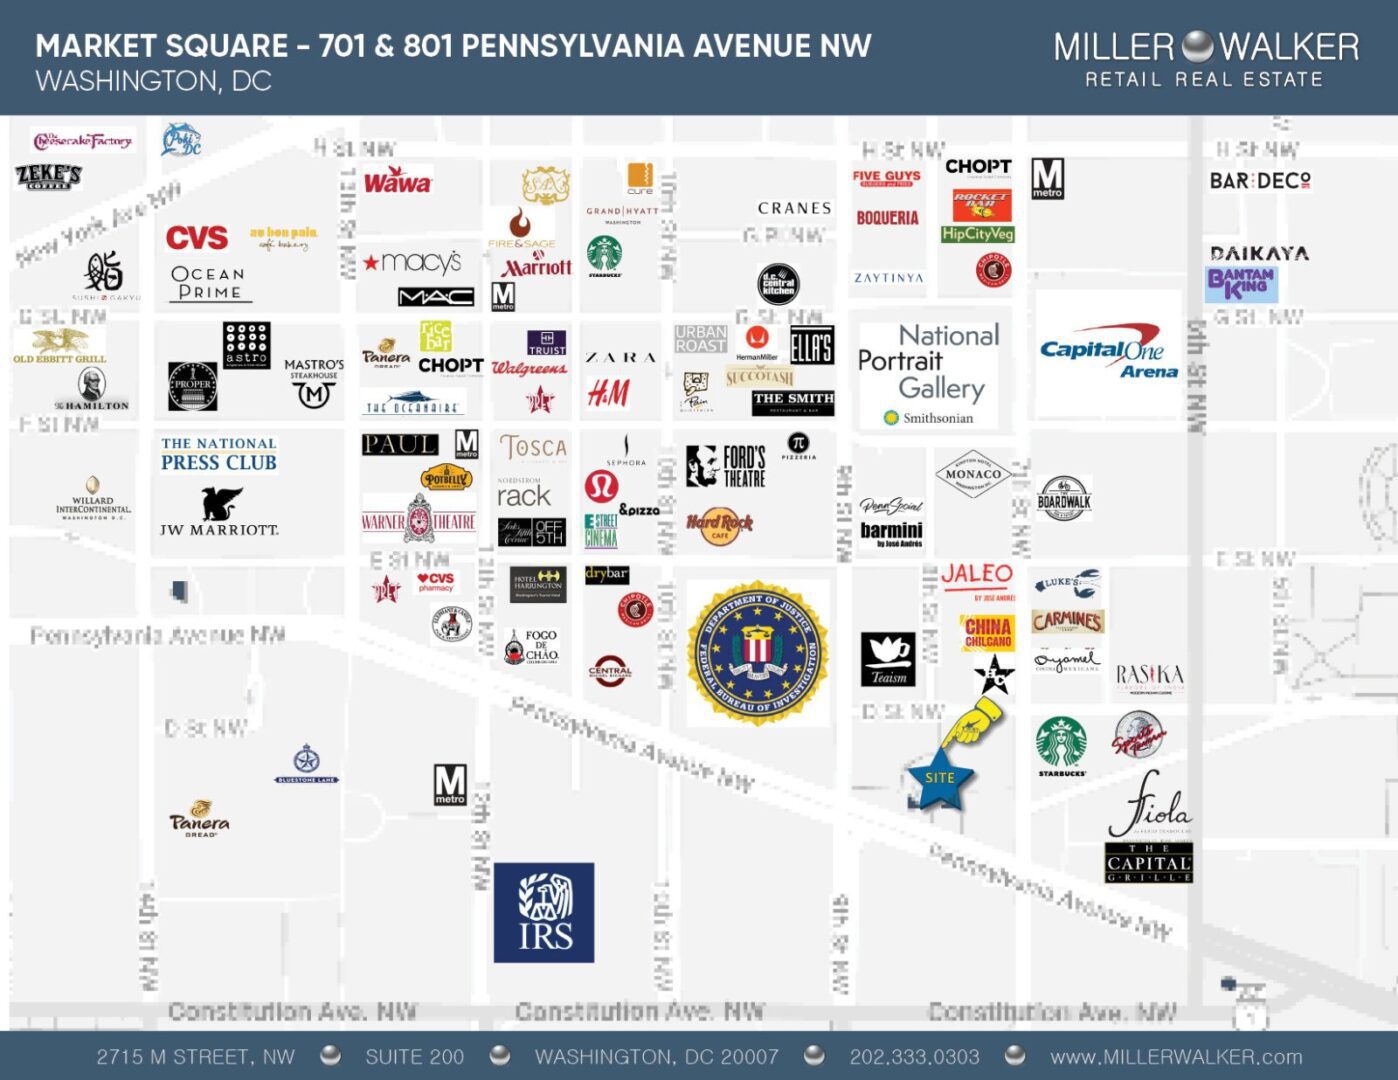 market square 801 pennsylvania avenue nearby retail and attractions in dc